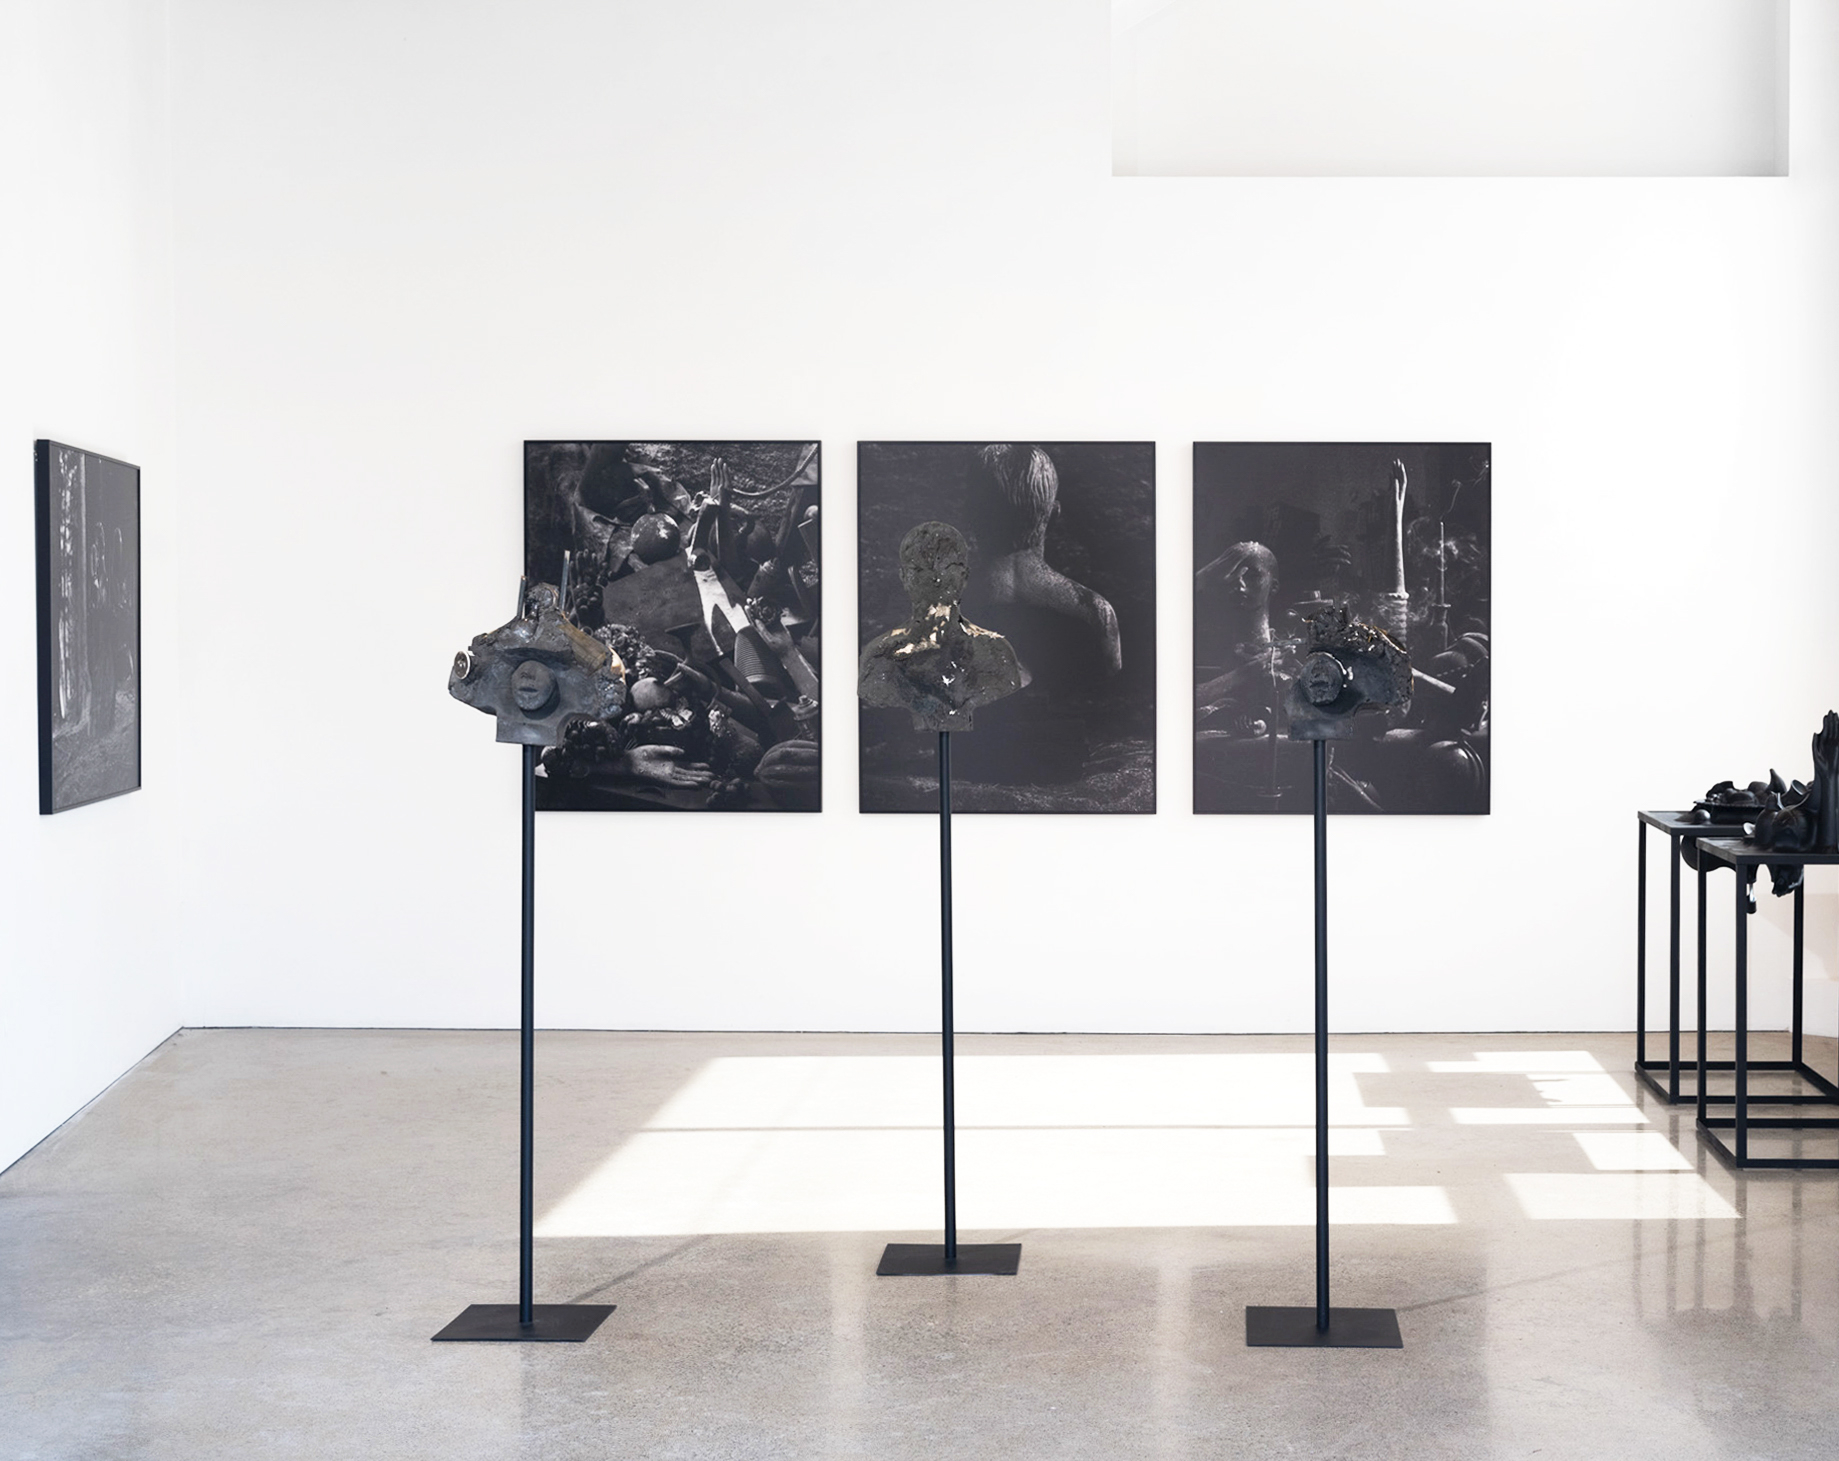     Ryan Van Der Hout, Collecting Dust, installation view, United Contemporary, 2022. Courtesy of the artist and United Contemporary

